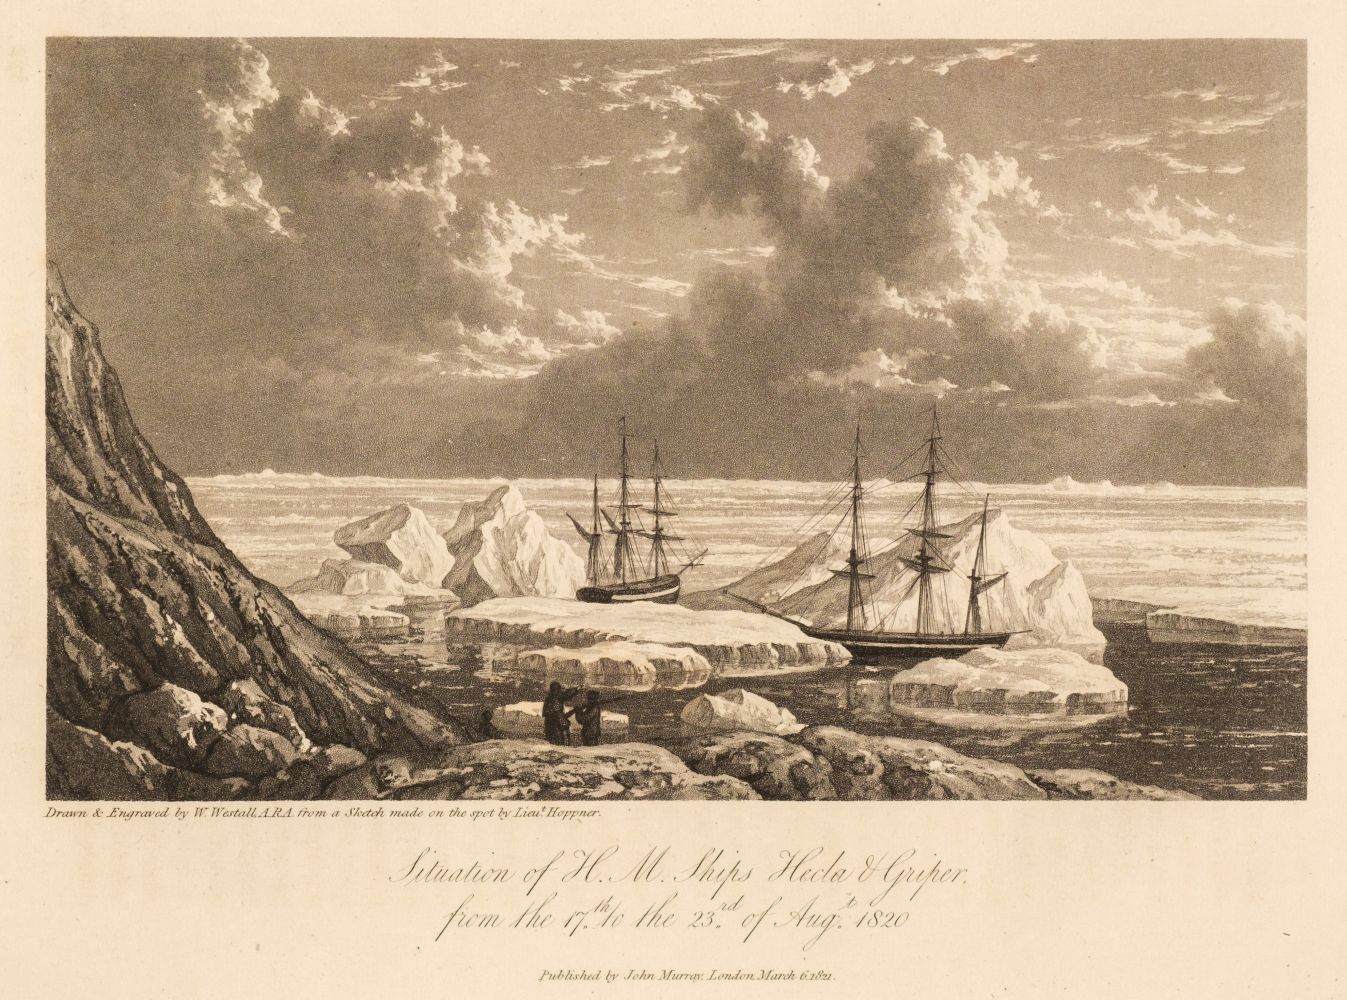 Parry (William Edward). Journal of a Voyage for the Discovery of a North-West Passage, 1st ed, 1821